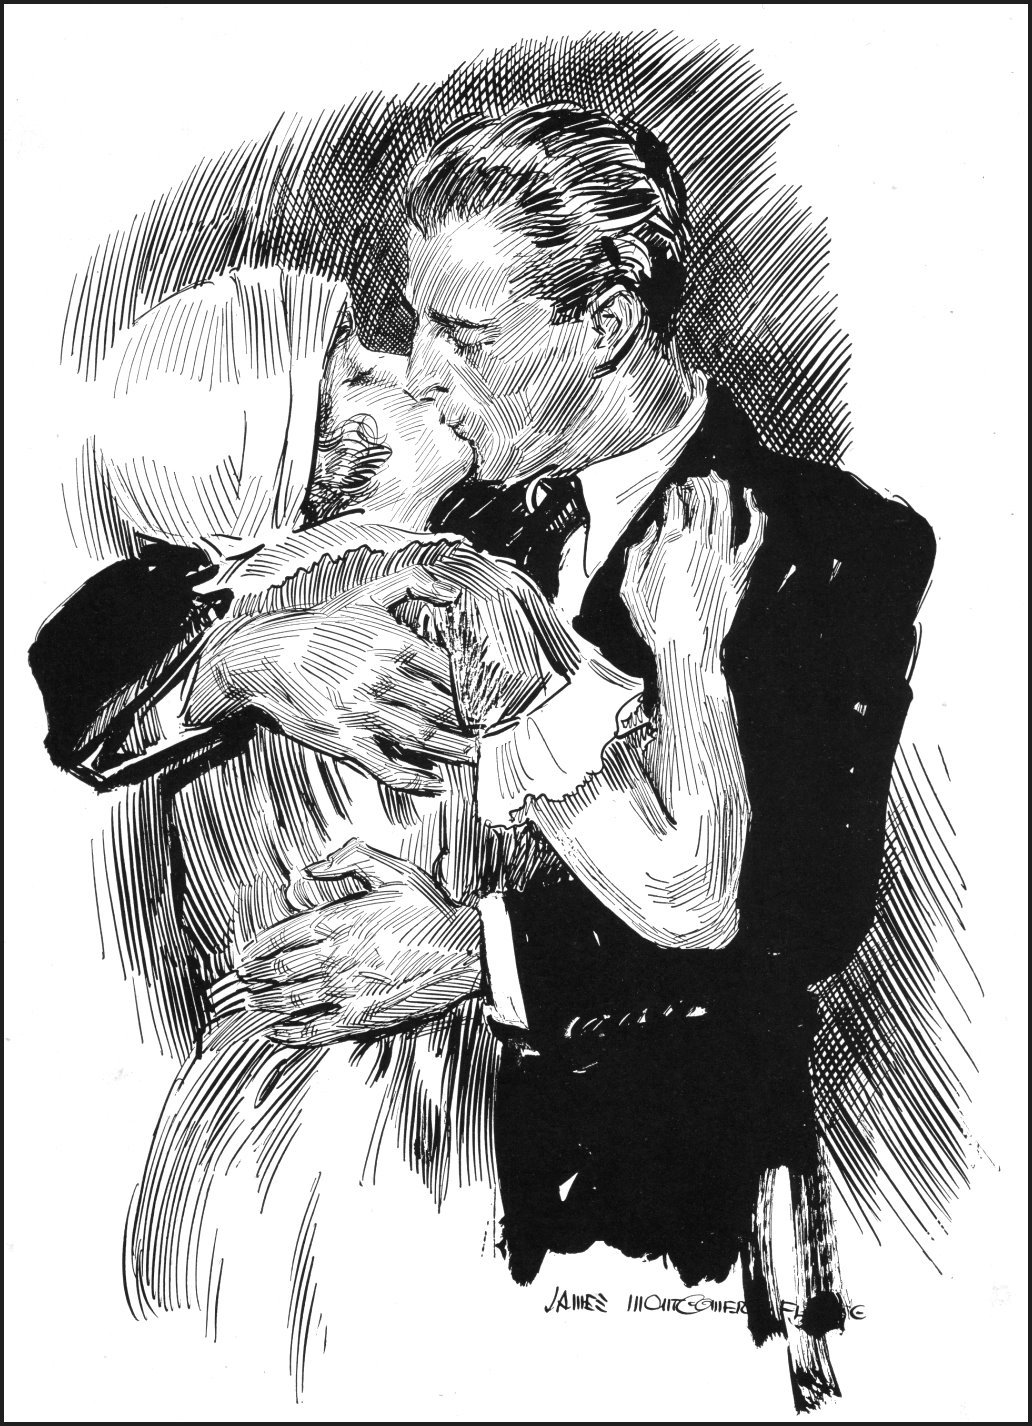 Passionate Kiss by James Montgomery Flagg